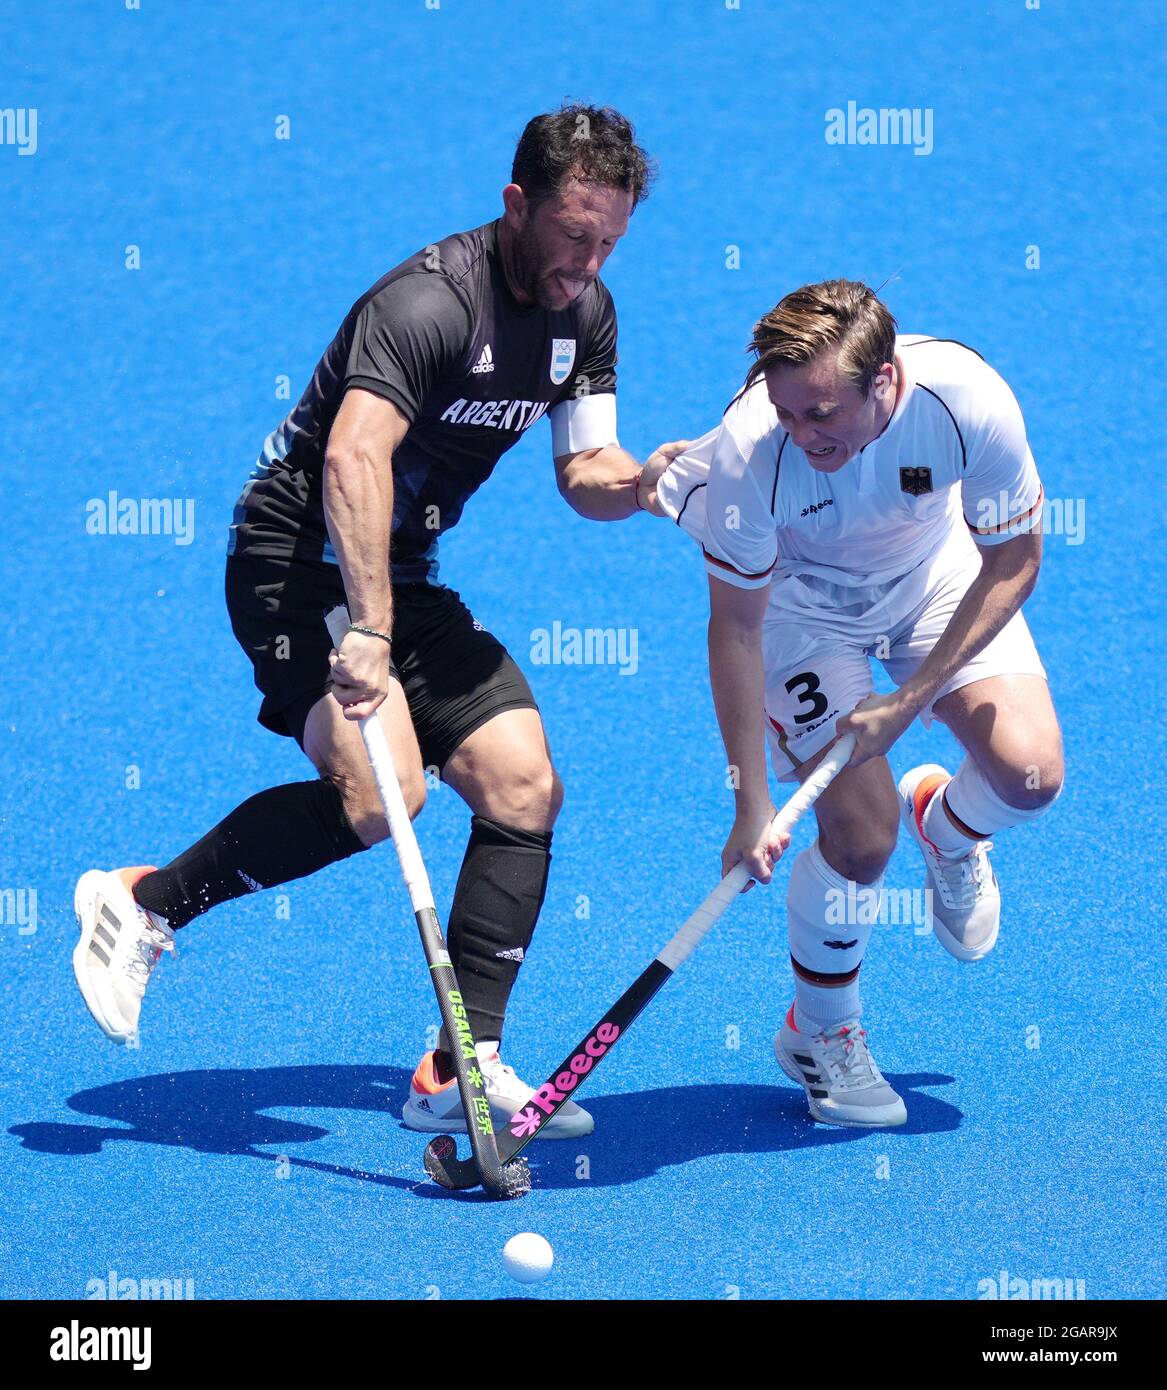 Tokyo, Japan. 1st Aug, 2021. Germany's Mats Jurgen Grambusch (R) competes during the men's quarter final of hockey against Argentina at the Tokyo 2020 Olympic Games in Tokyo, Japan, Aug. 1, 2021. Credit: Yang Shiyao/Xinhua/Alamy Live News Stock Photo